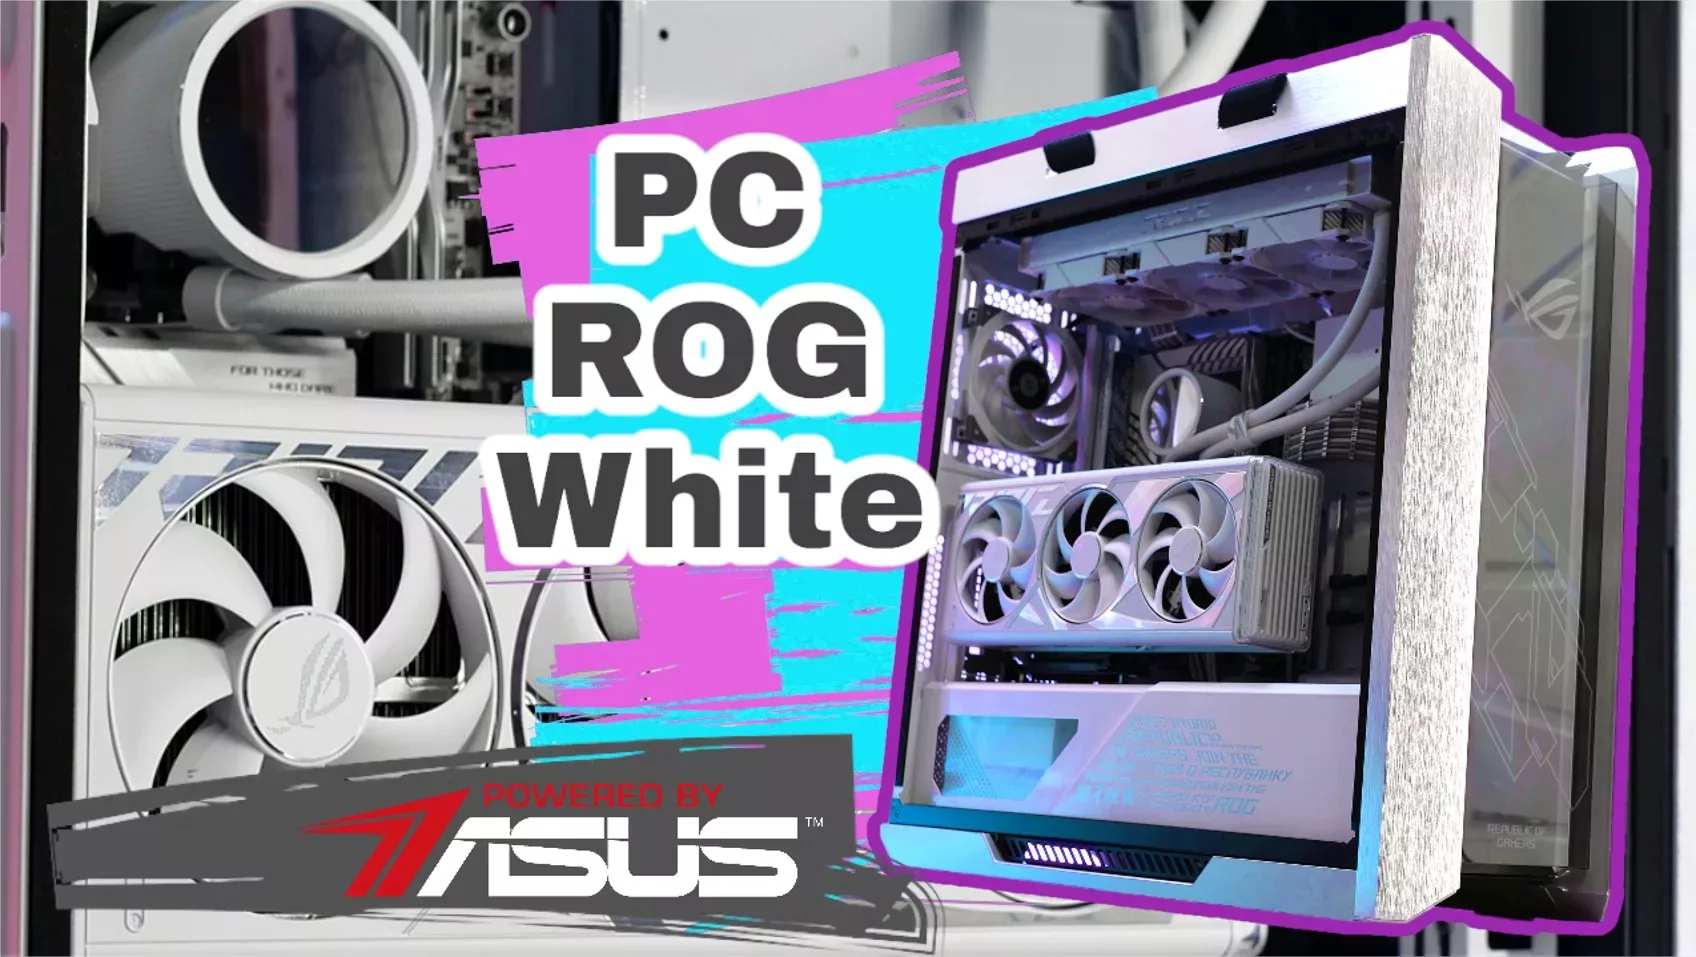 Build] PC GAMER ROG White Powered By ASUS - Page 2 à 6 - Pause